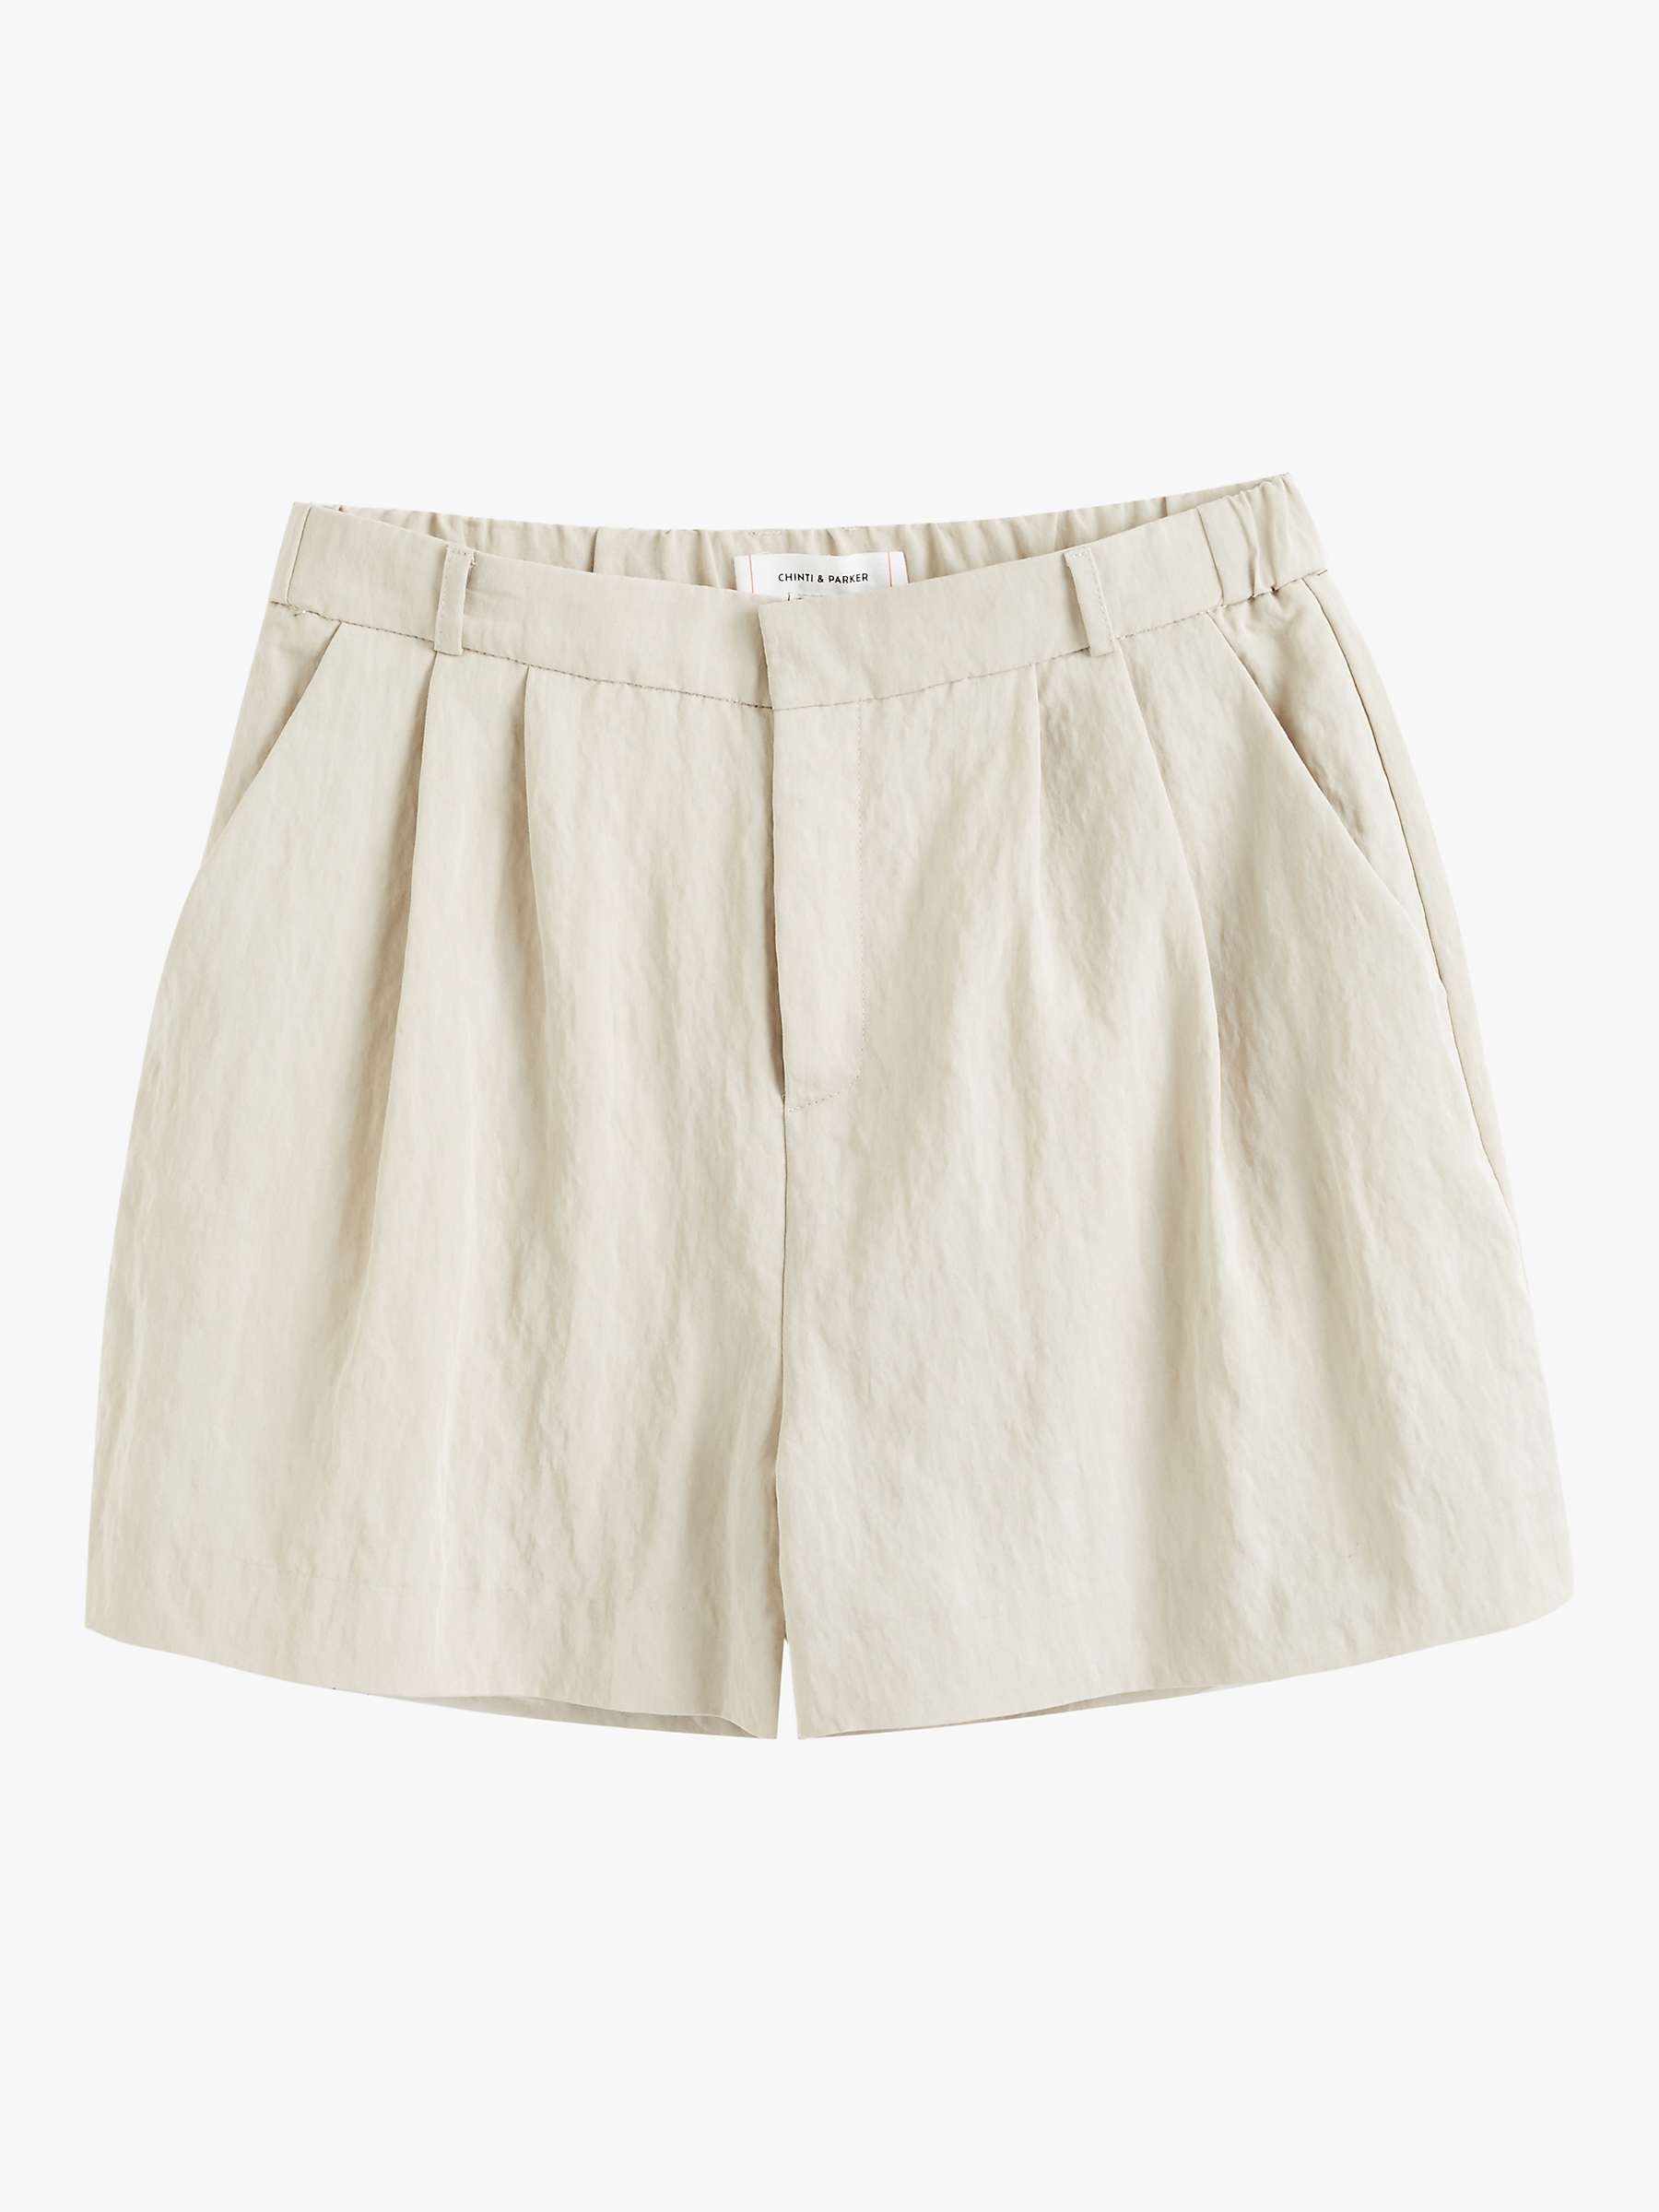 Buy Chinti & Parker Lyocell Blend Shorts Online at johnlewis.com